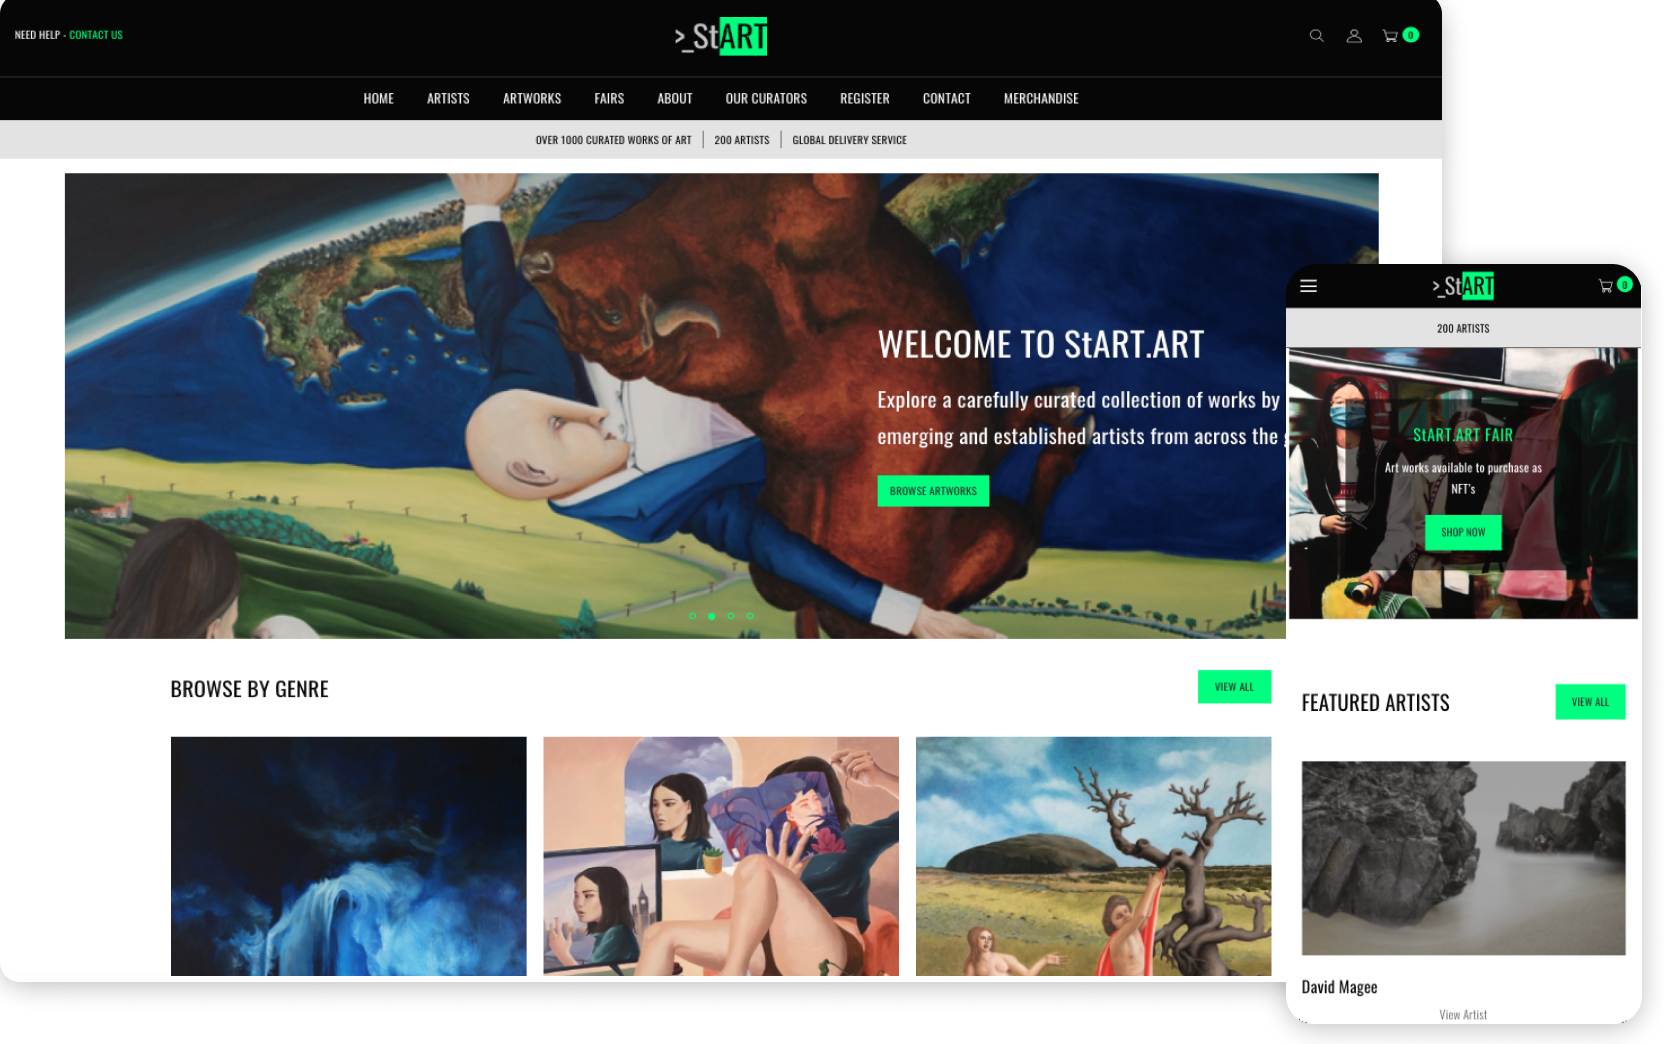 Supporting image with StART.art homepage on desktop and mobile screens